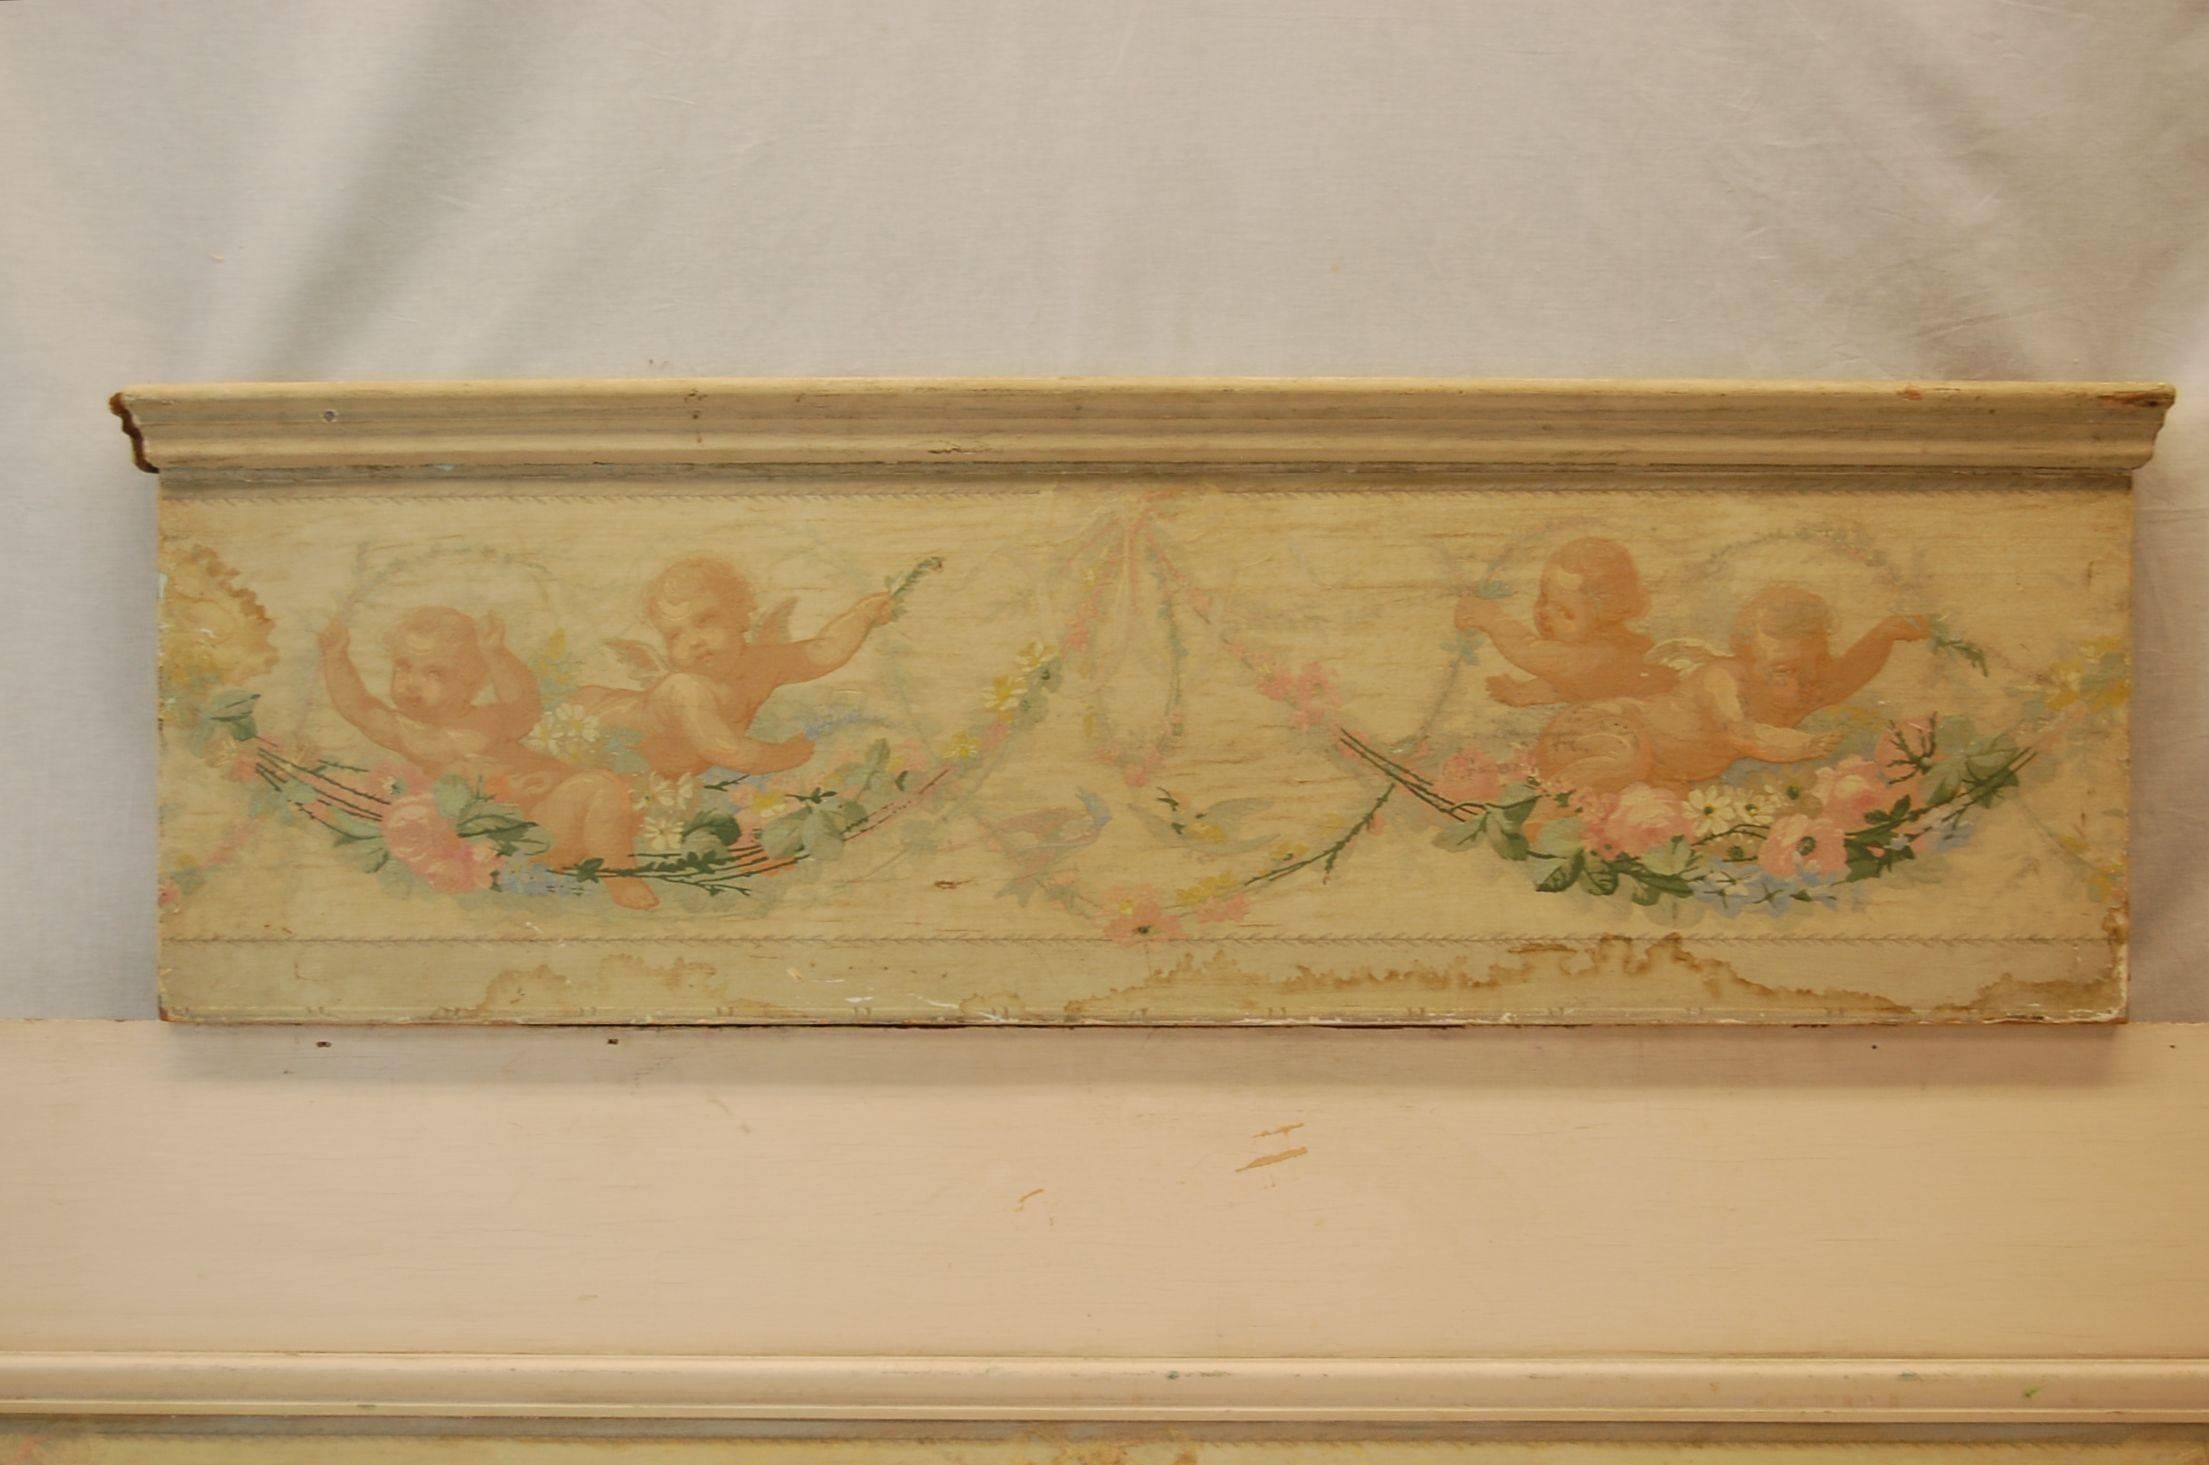 Two valences on plywood, the smaller valence is 43 5/16 inches x 12 1/4 inches with 2 inch returns. The second valence is 66 x 12 tall. Originally purchased from Gracie, Inc. in New York City in the 1930s by Mrs. M.W. Singer and were used as window